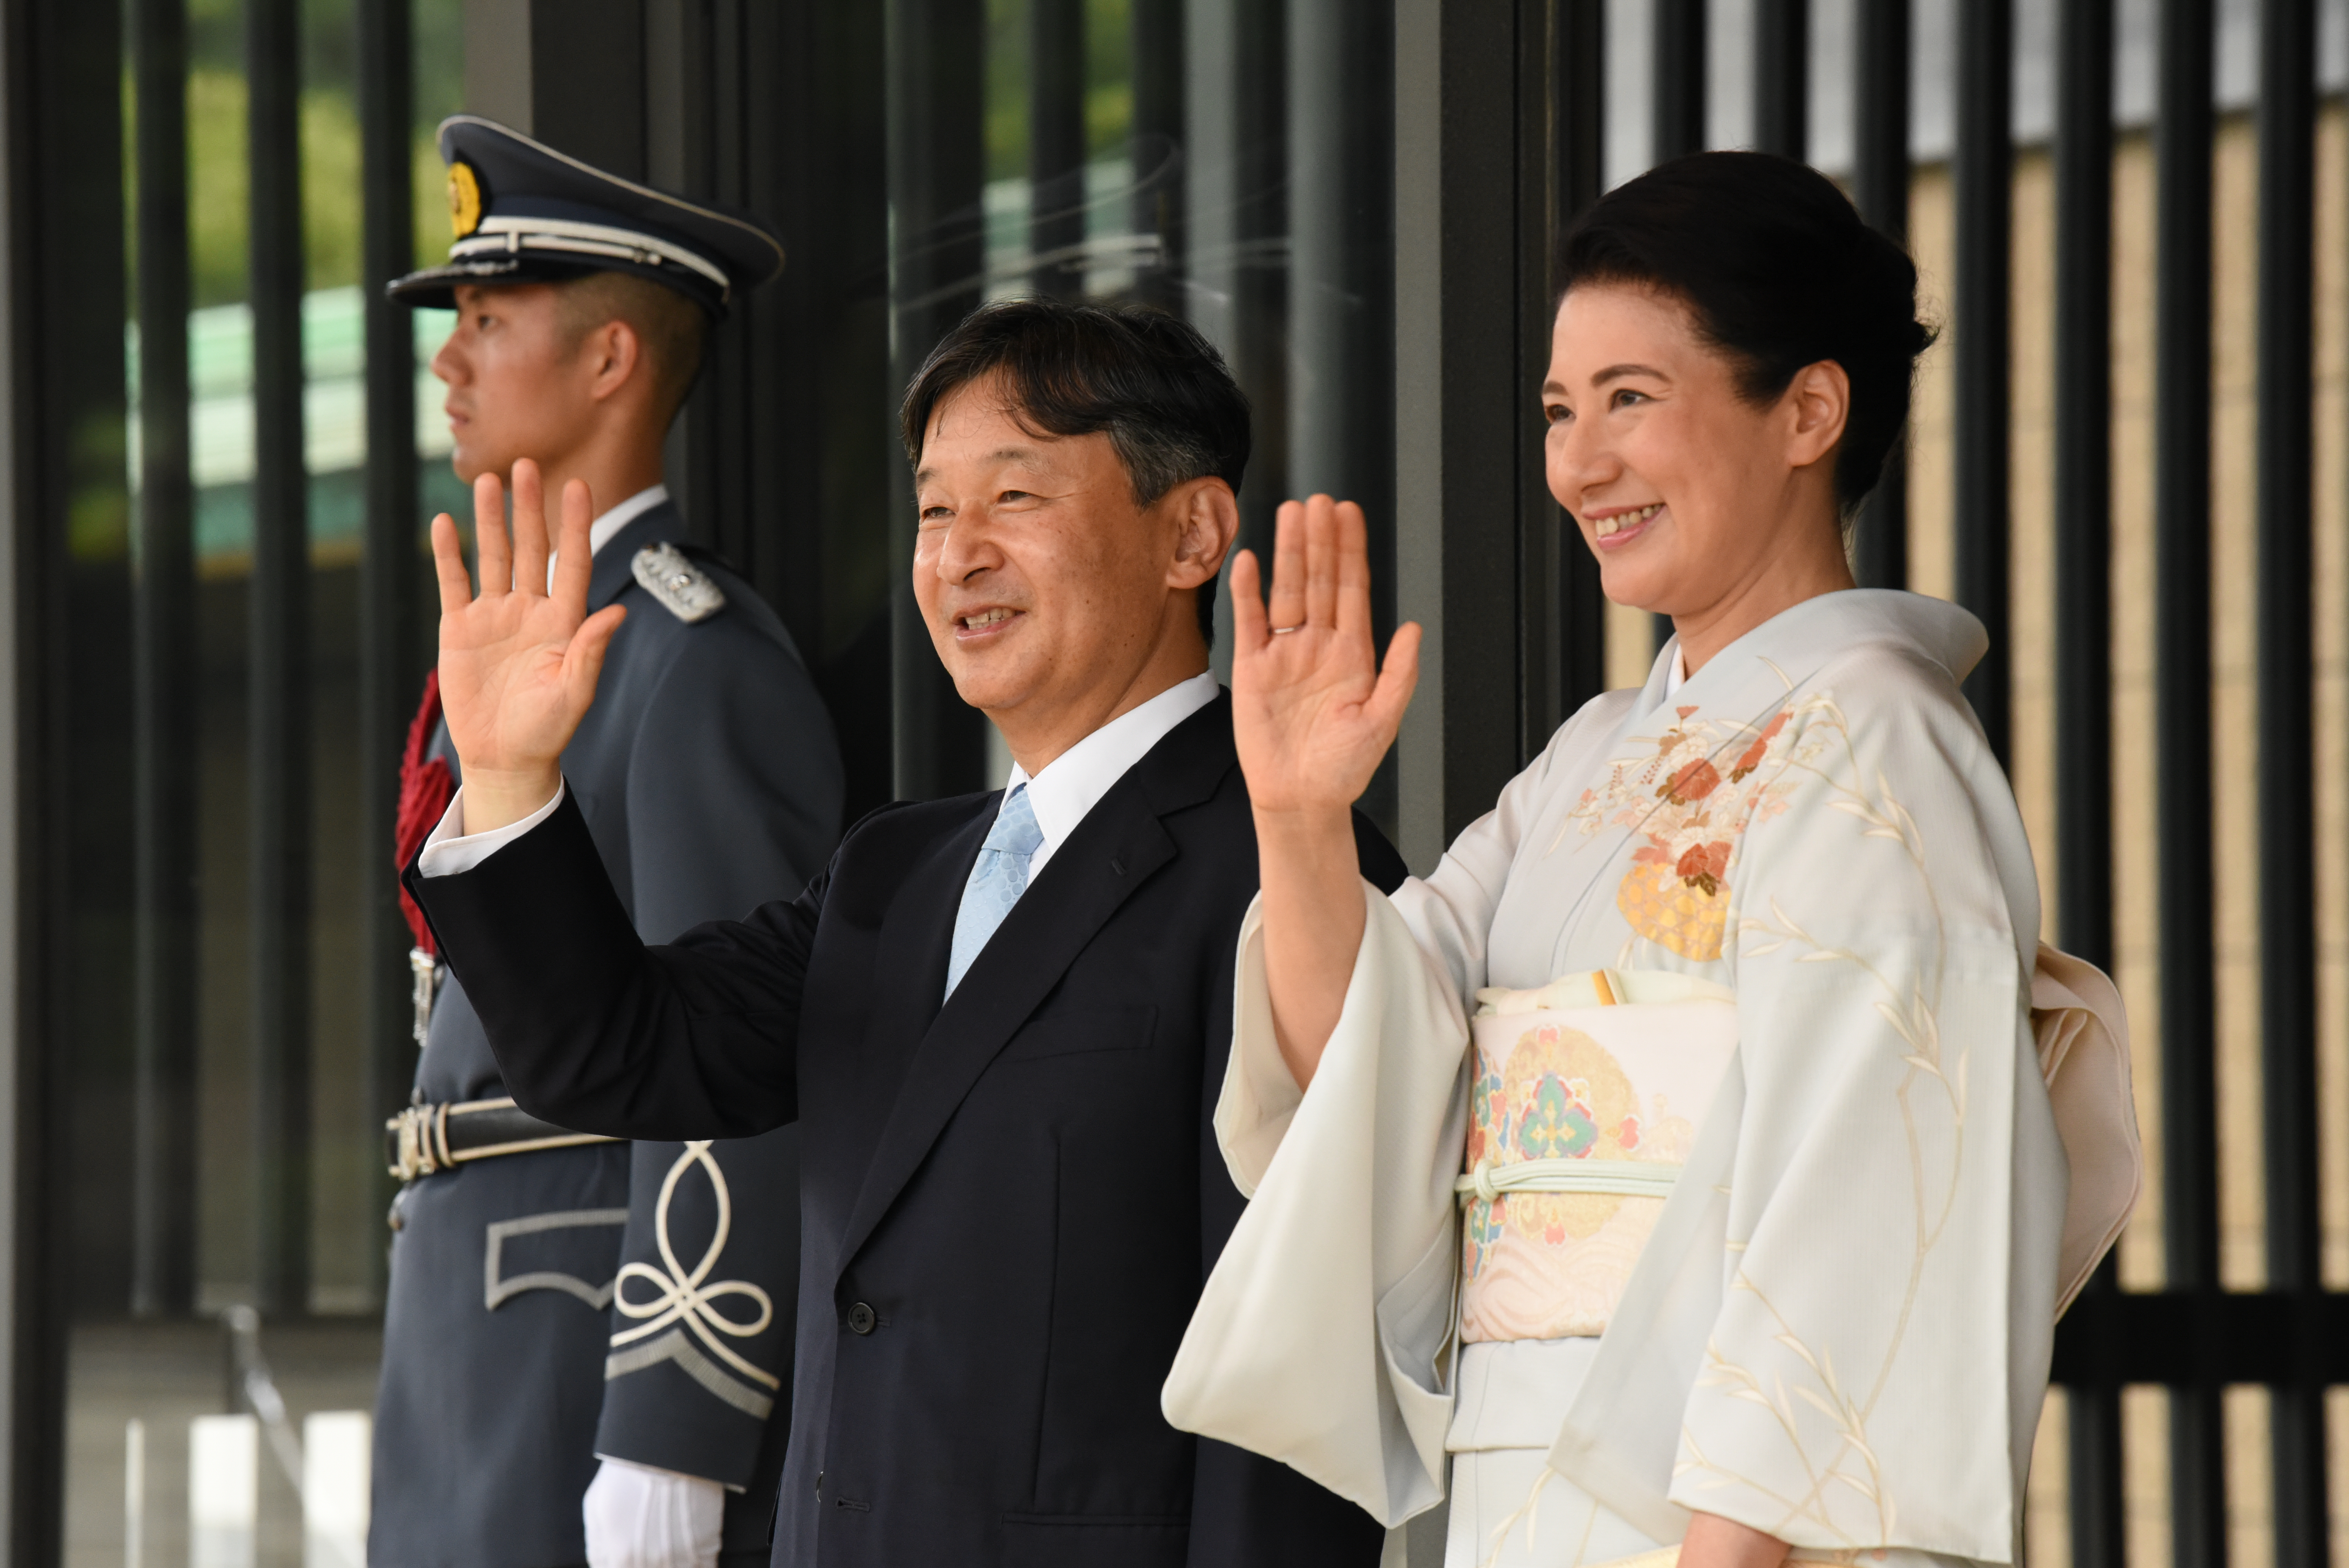 The Emperor and Empress of Japan to make State Visit to the UK – Royal Central